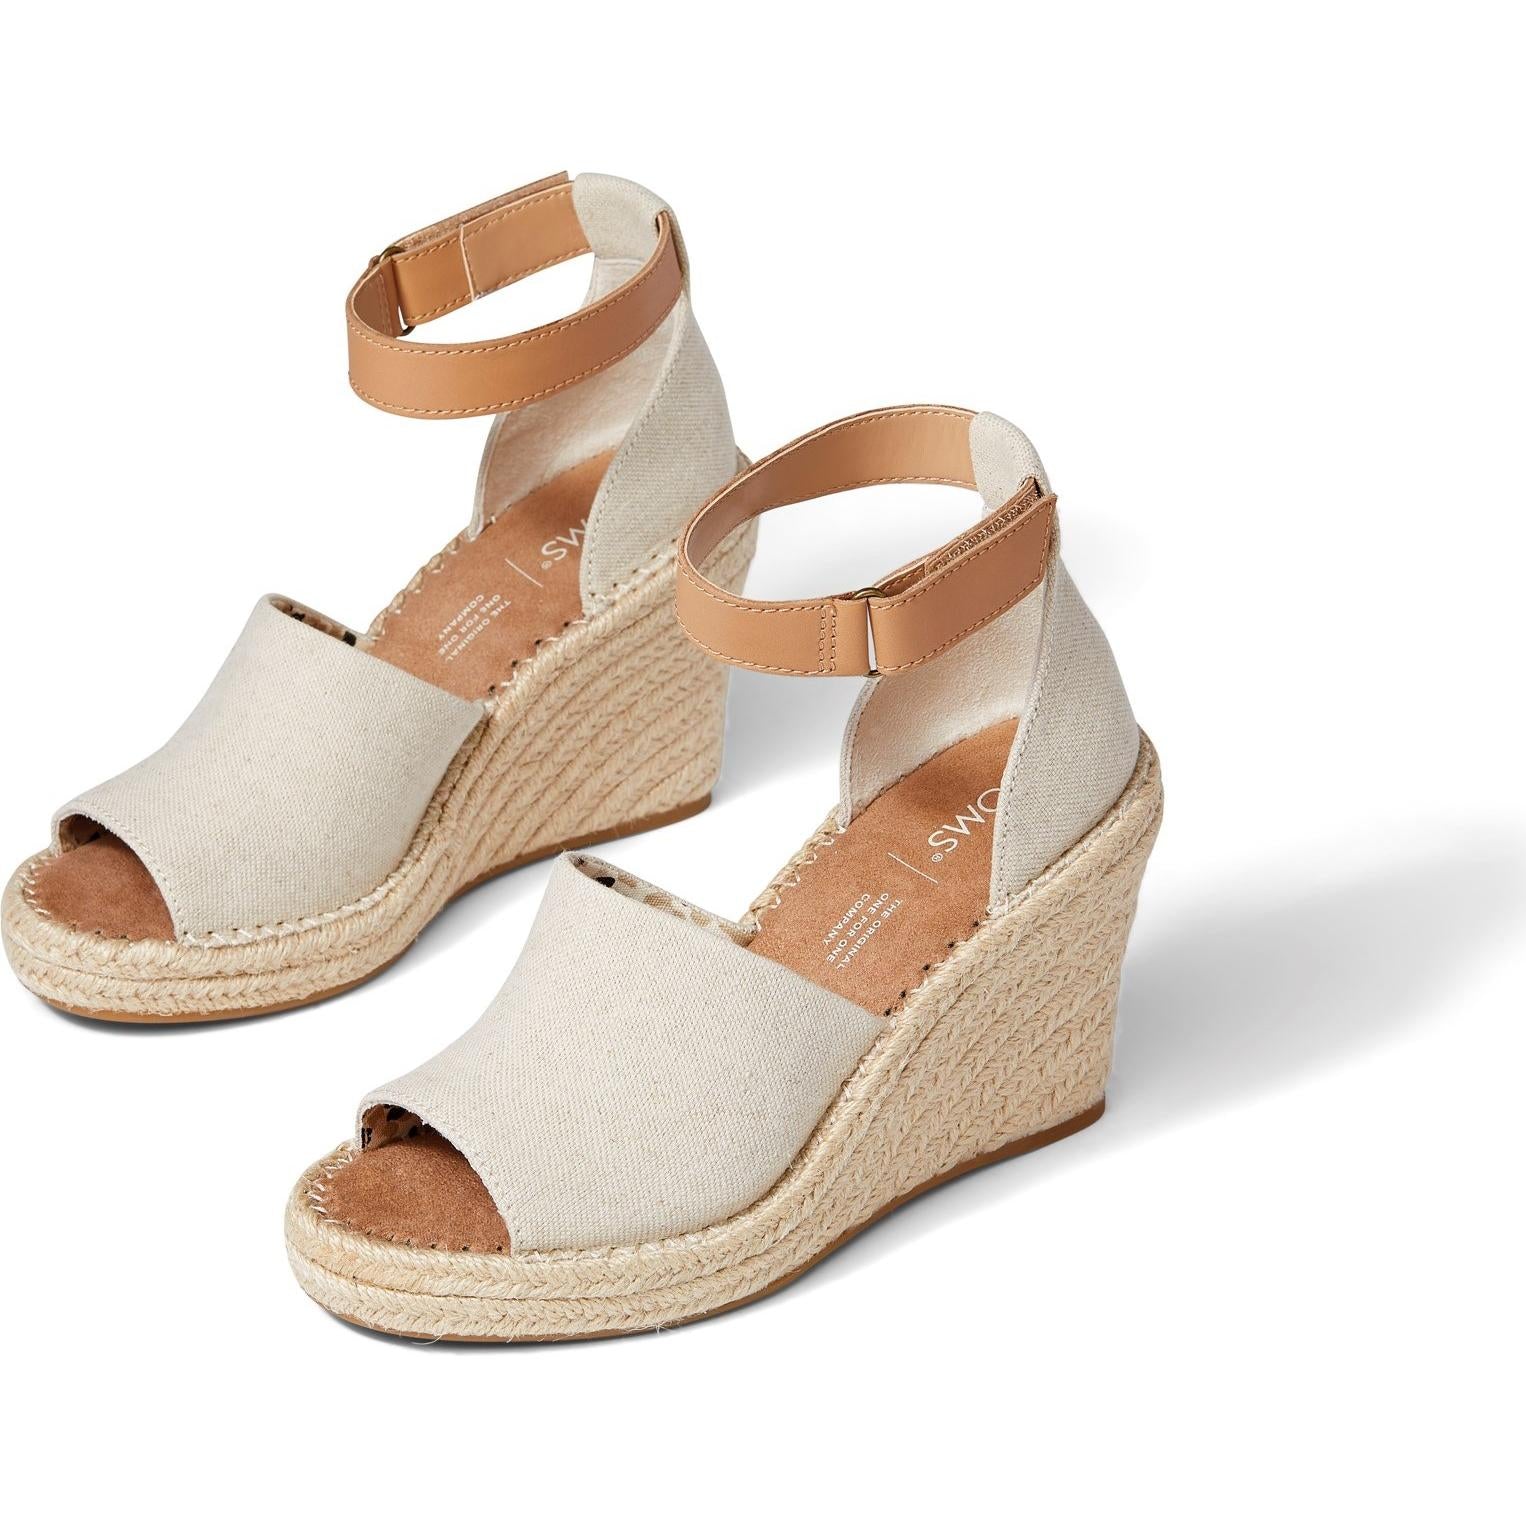 Toms Marisol Natural Oxford/Leather Wedge Sandals